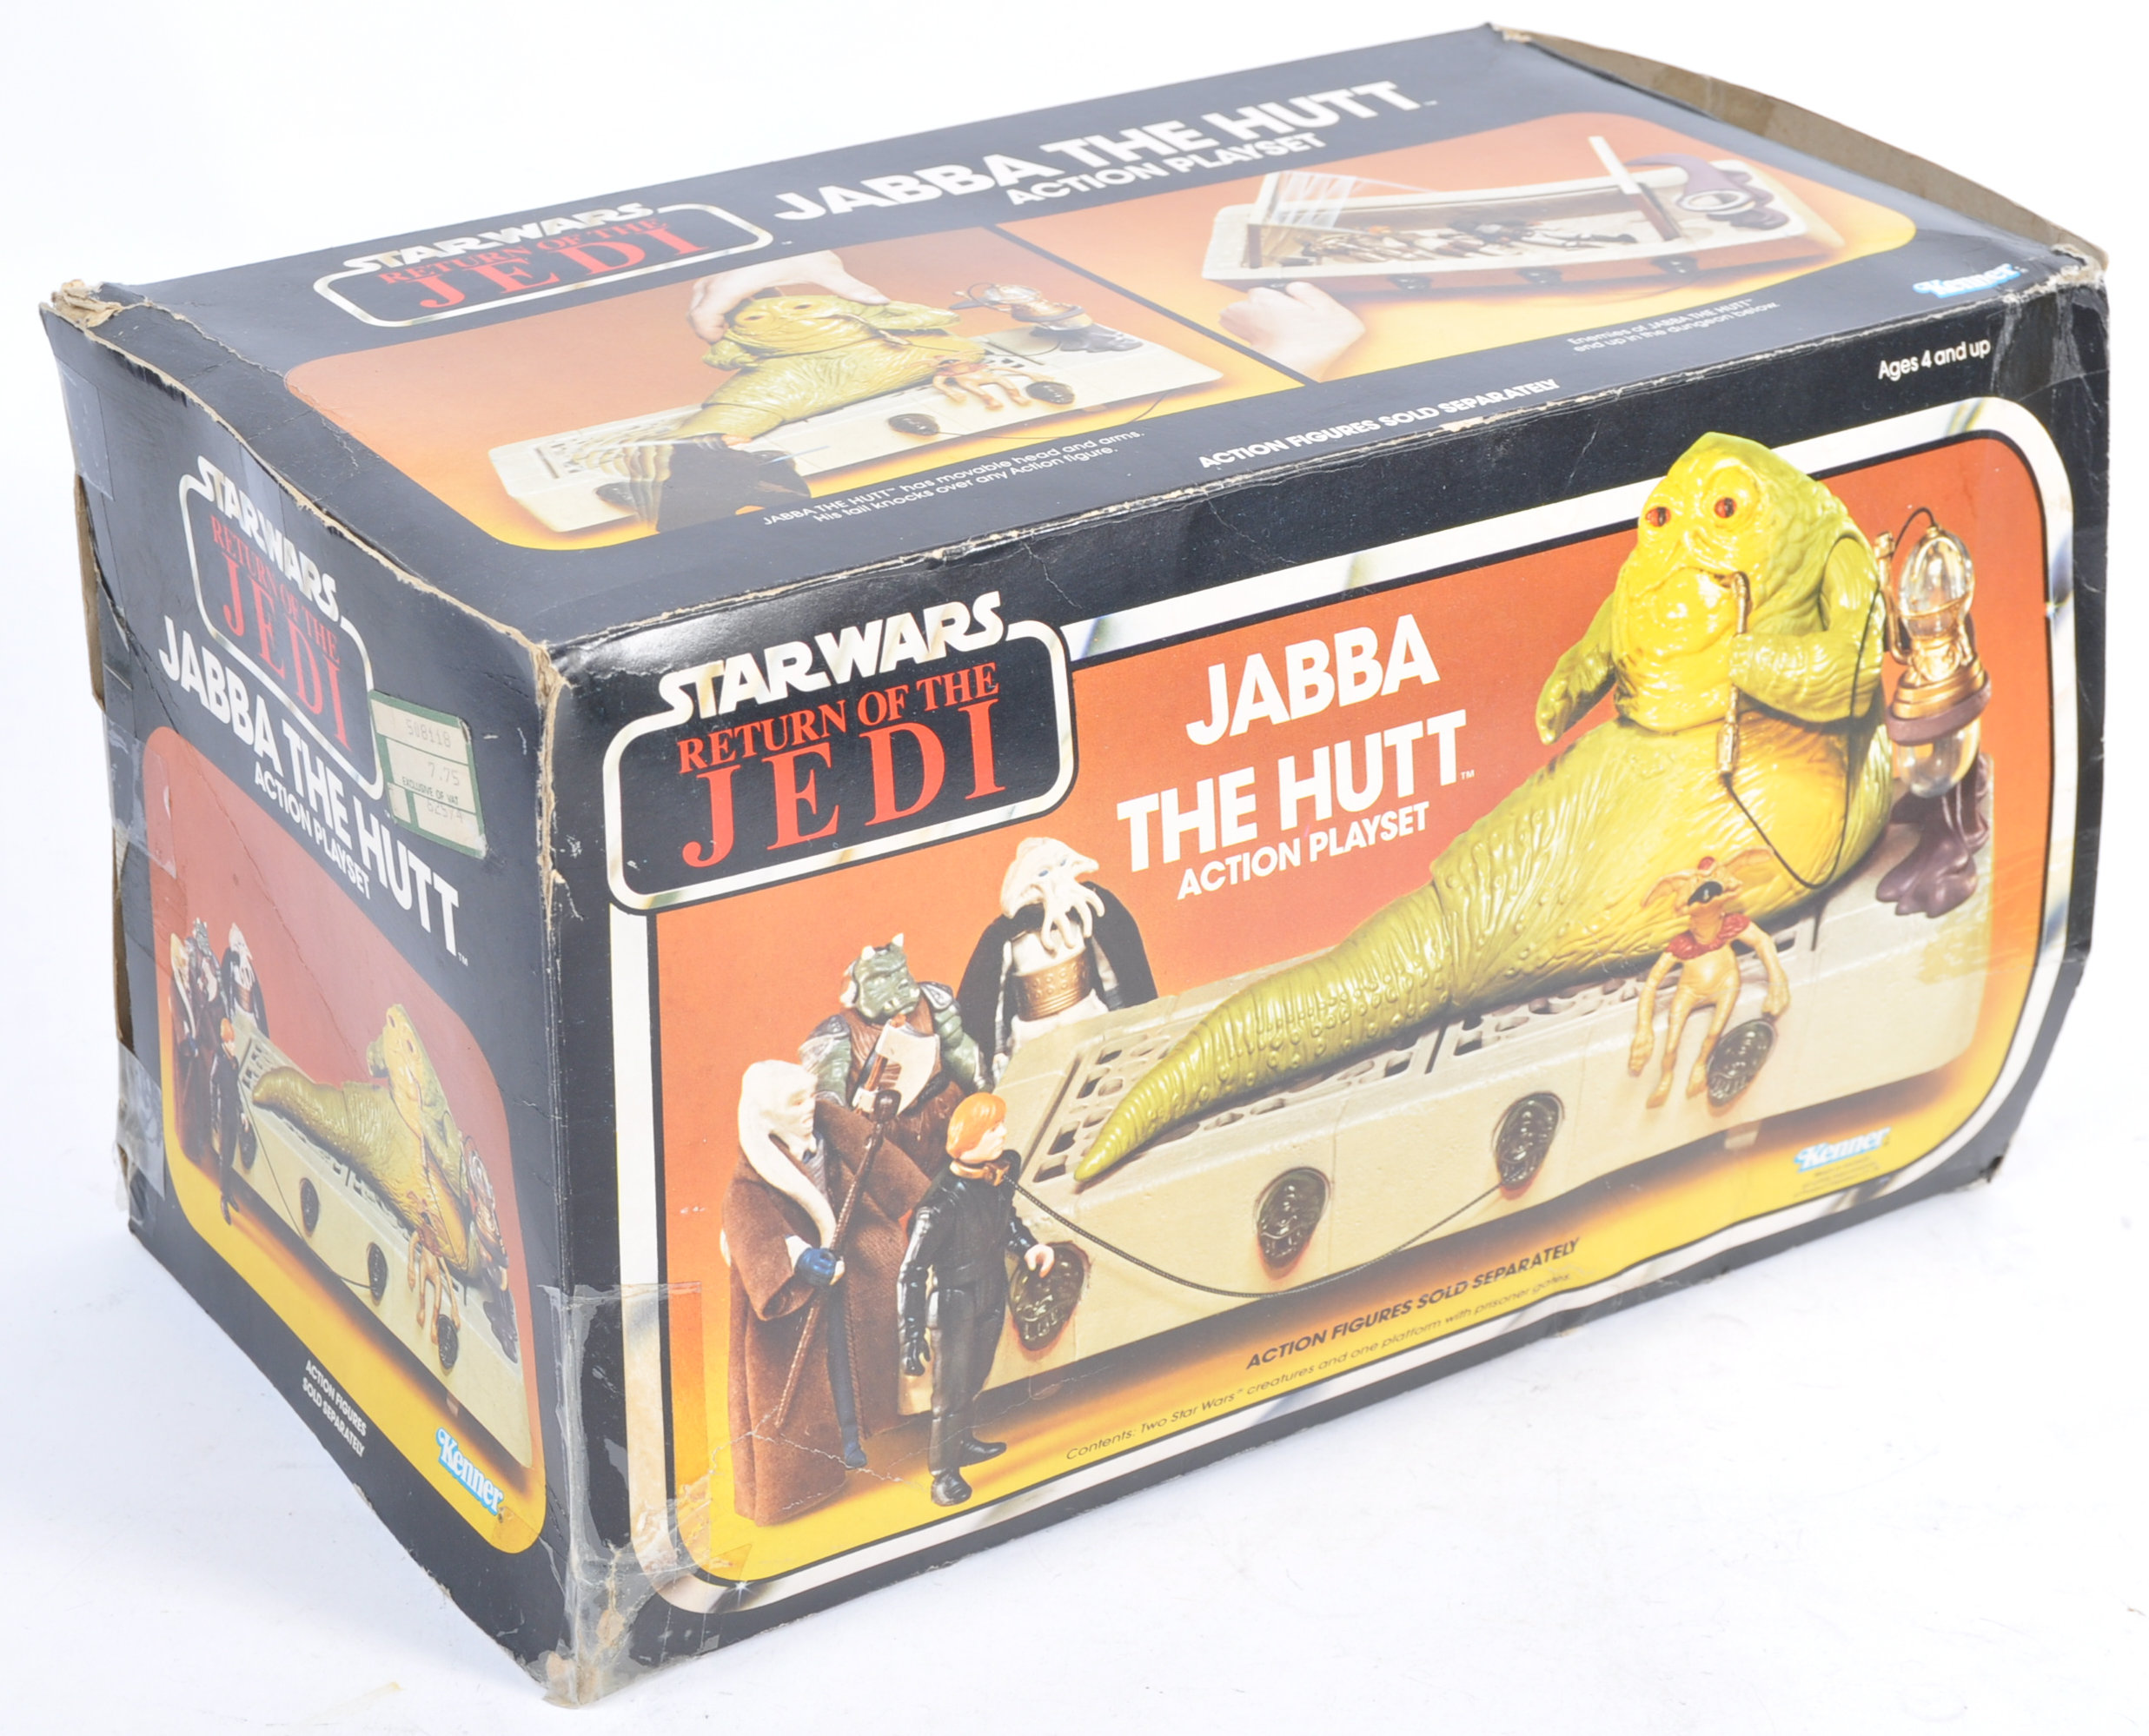 VINTAGE STAR WARS KENNER JABBA THE HUTT ACTION FIGURE PLAYSET - Image 7 of 8